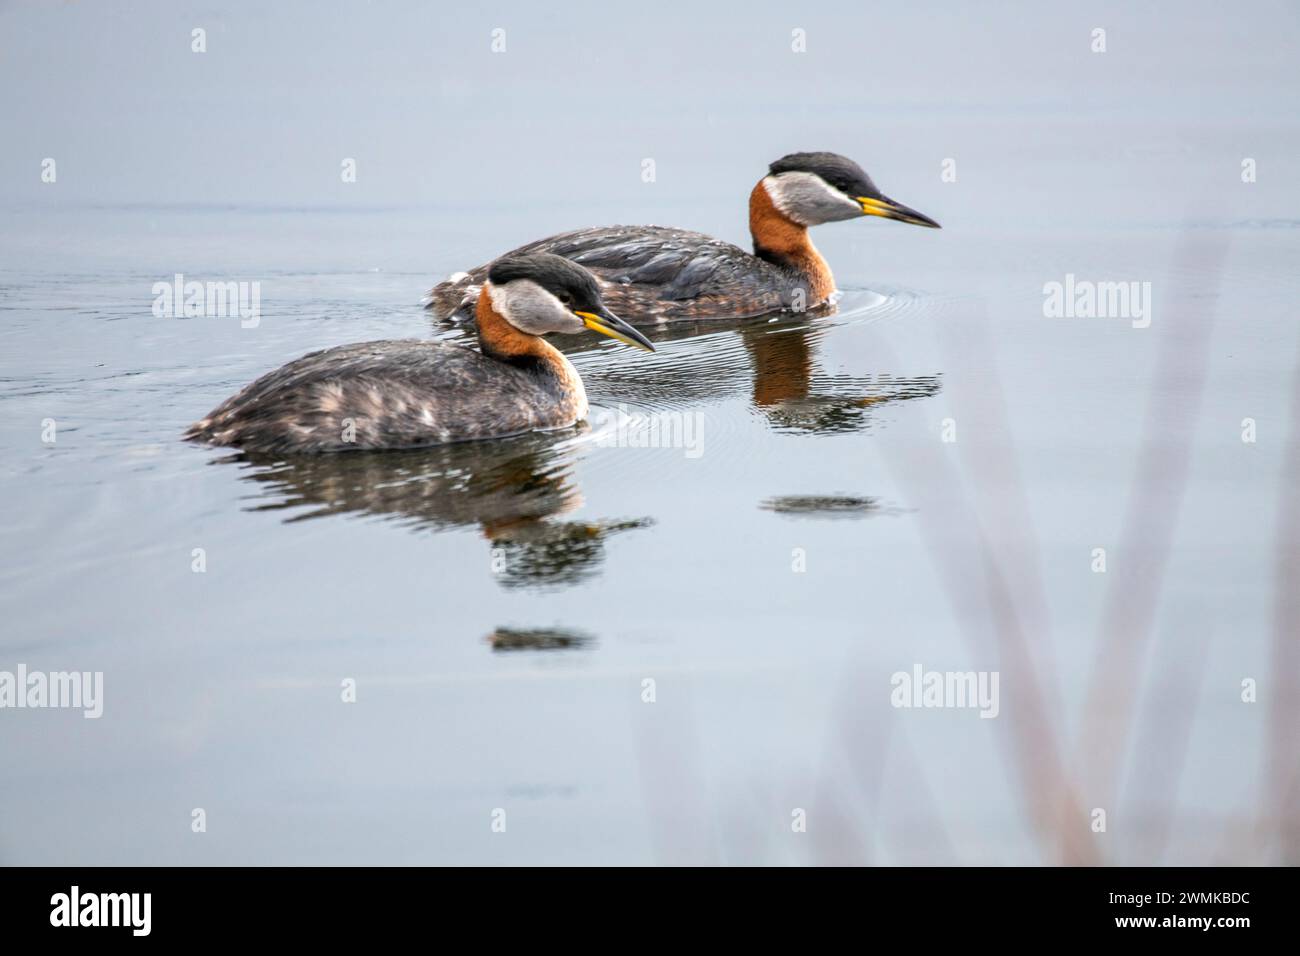 Close-up portrait of a pair of mating, red-necked grebes (Podiceps grisegena) swimming in a pond near 108 Mile Heritage House on the Cariboo Highwa... Stock Photo